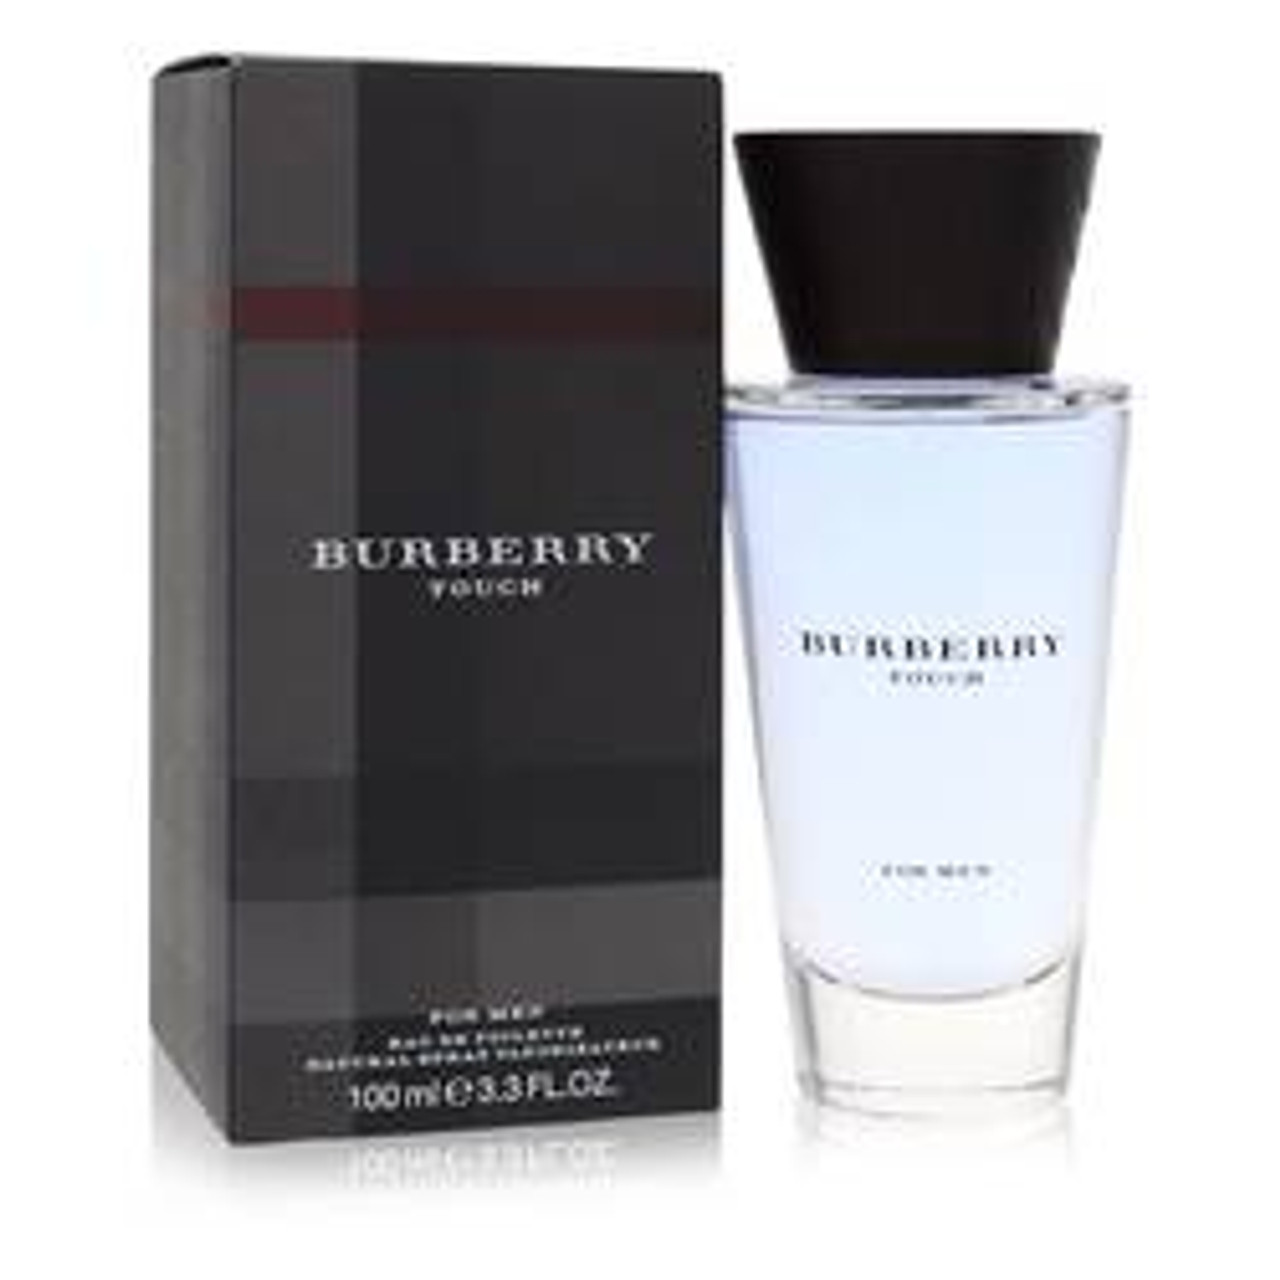 Burberry Touch Cologne By Burberry Eau De Toilette Spray 3.3 oz for Men - [From 112.00 - Choose pk Qty ] - *Ships from Miami